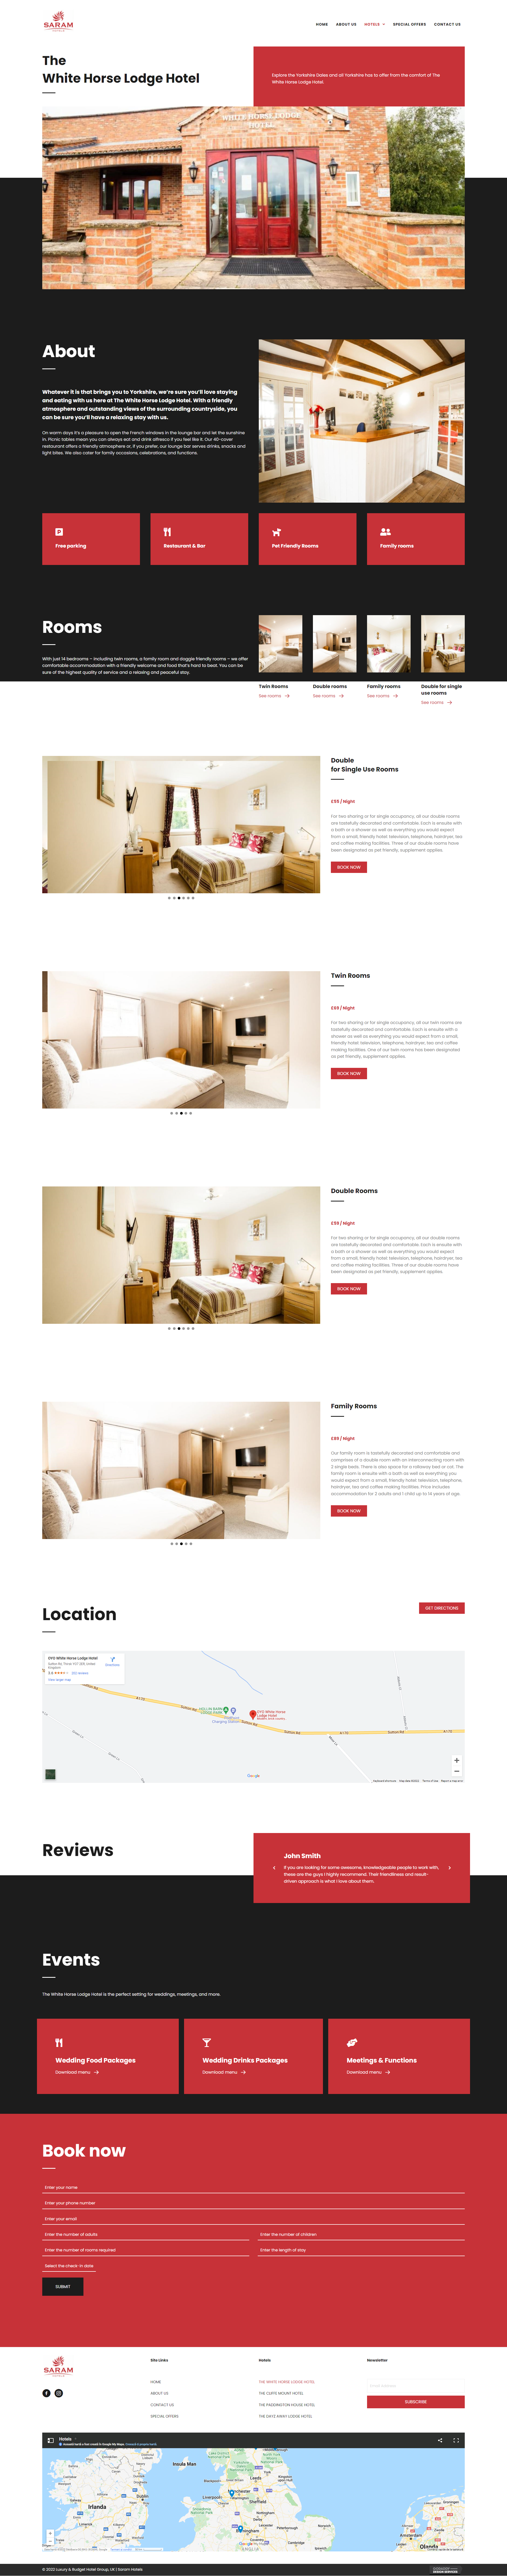 saram-hotels-about